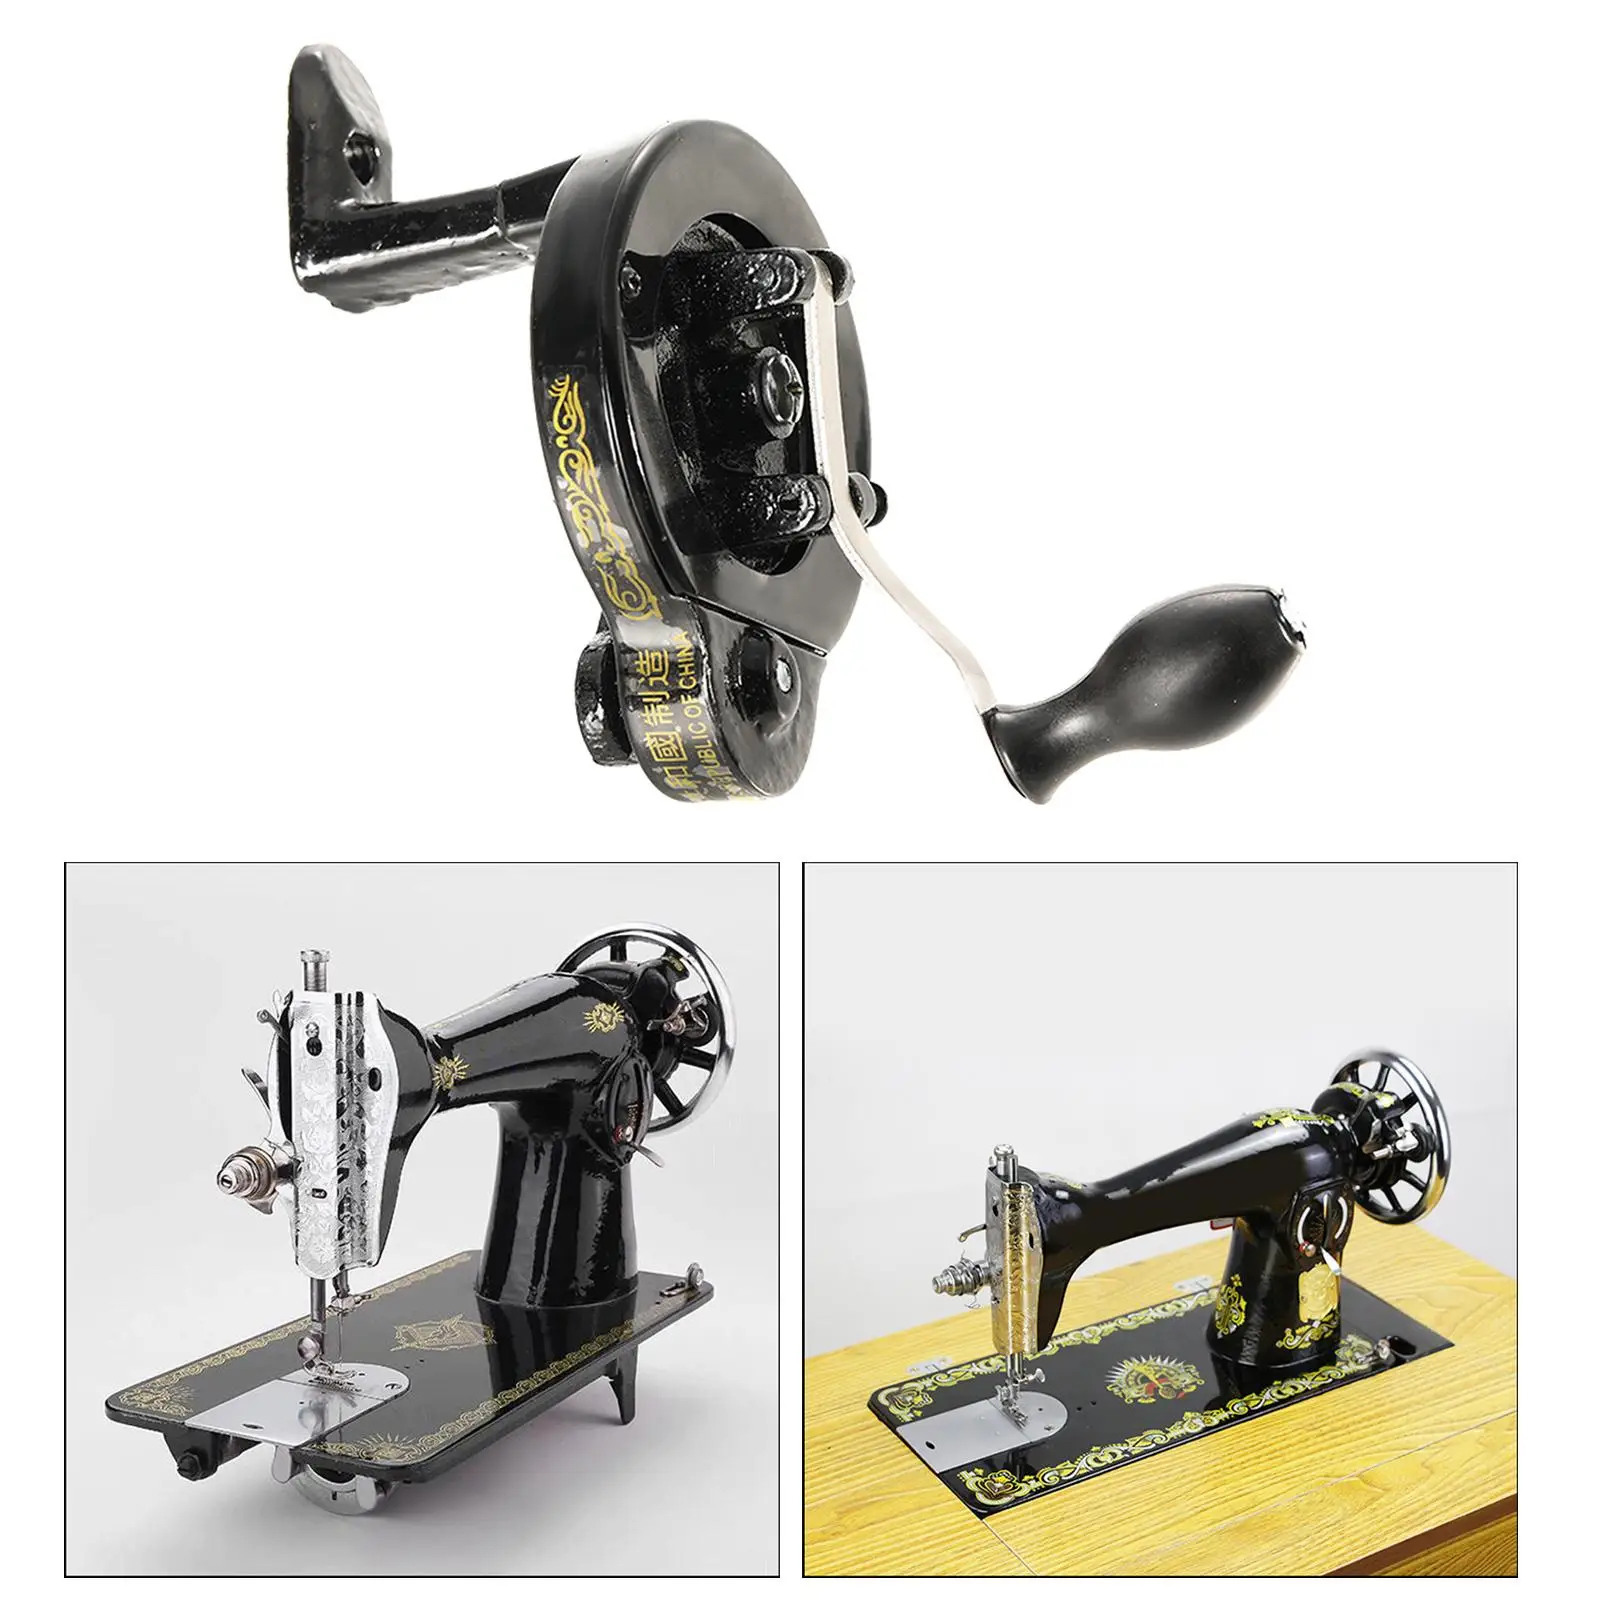 Sewing Machine Hand Crank Sew Accessories Handcrank for Old Sewing Machines